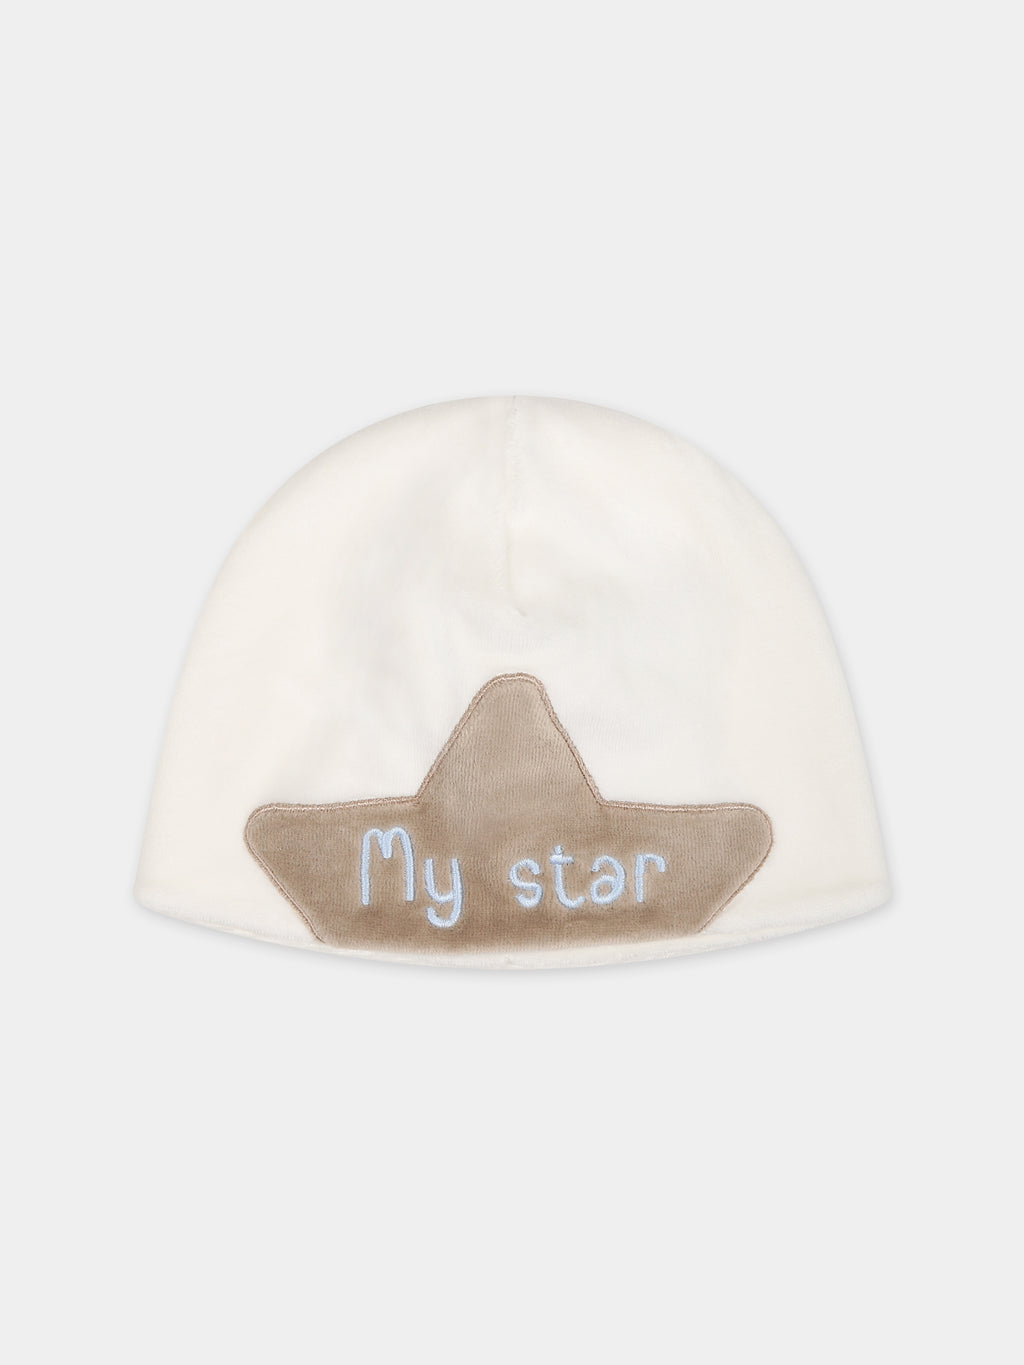 White hat for baby boy with star